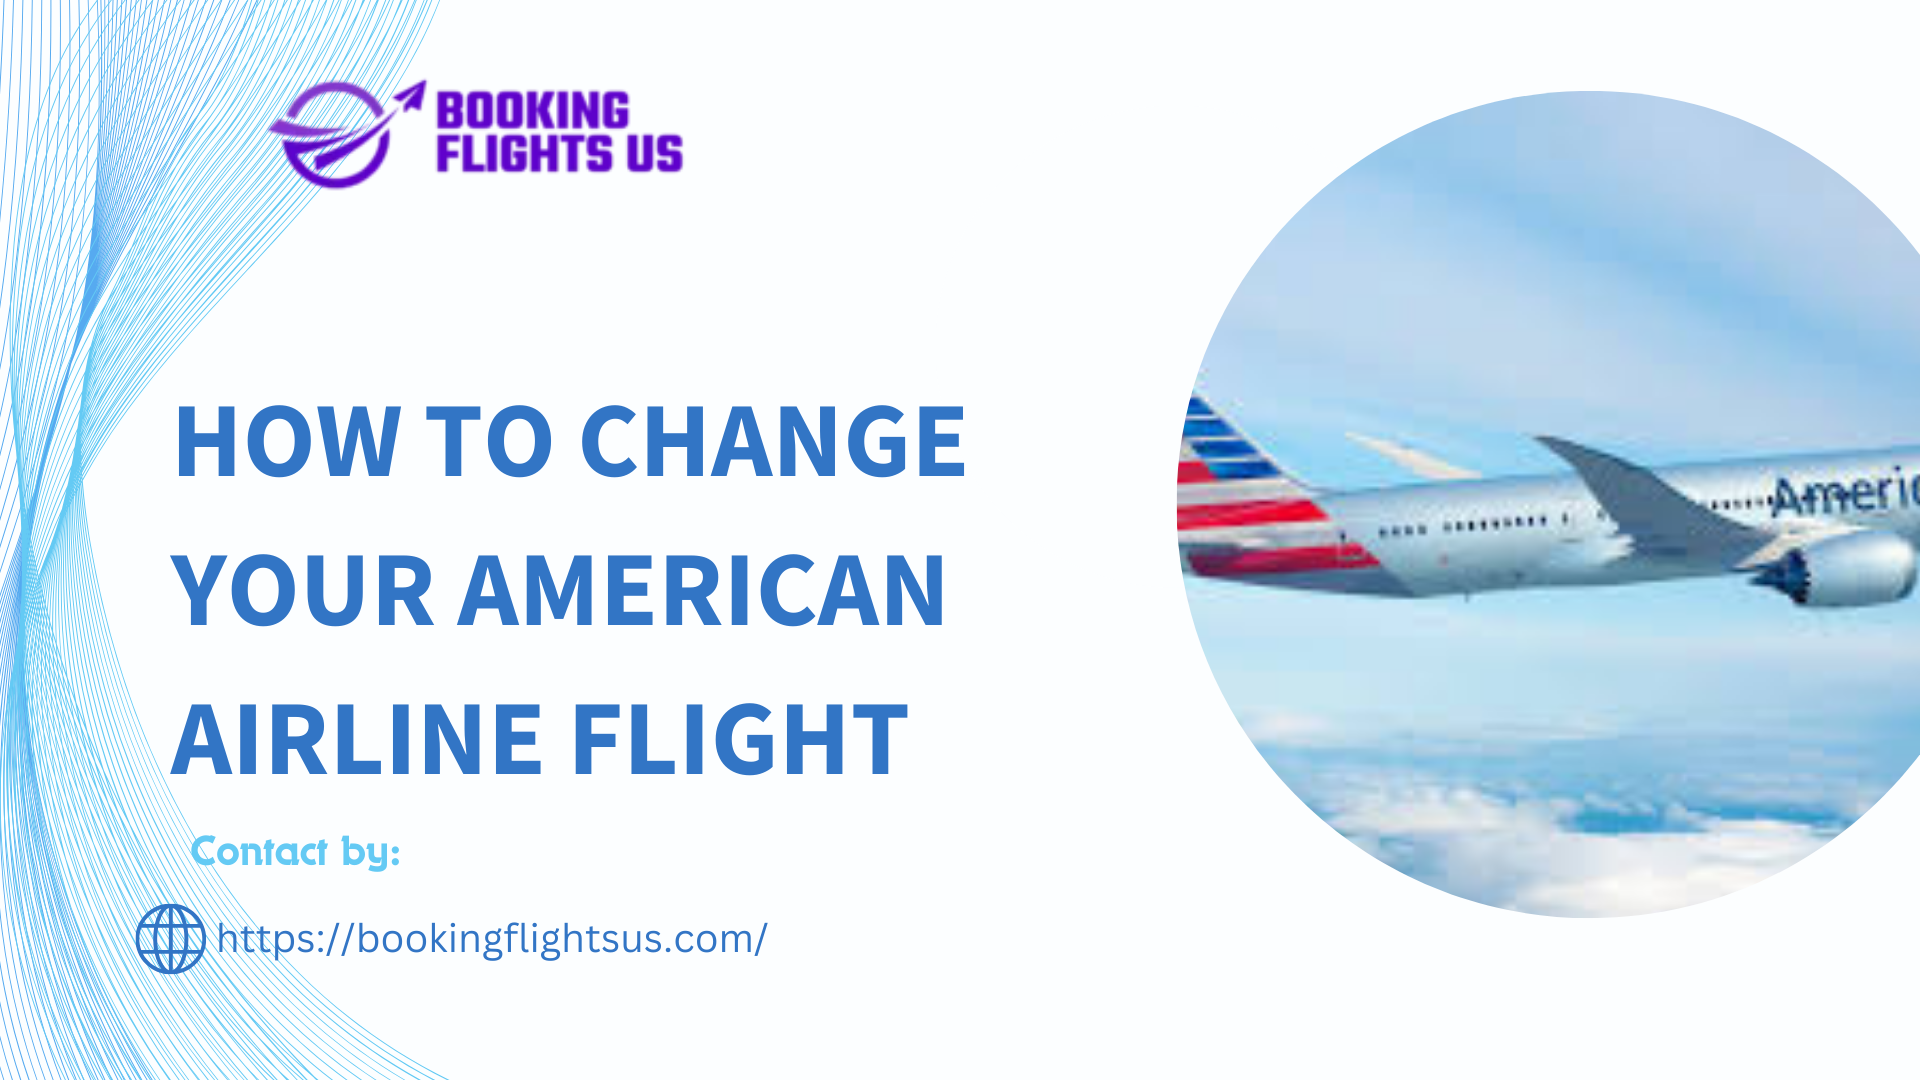 How to Change Your American Airline Flight